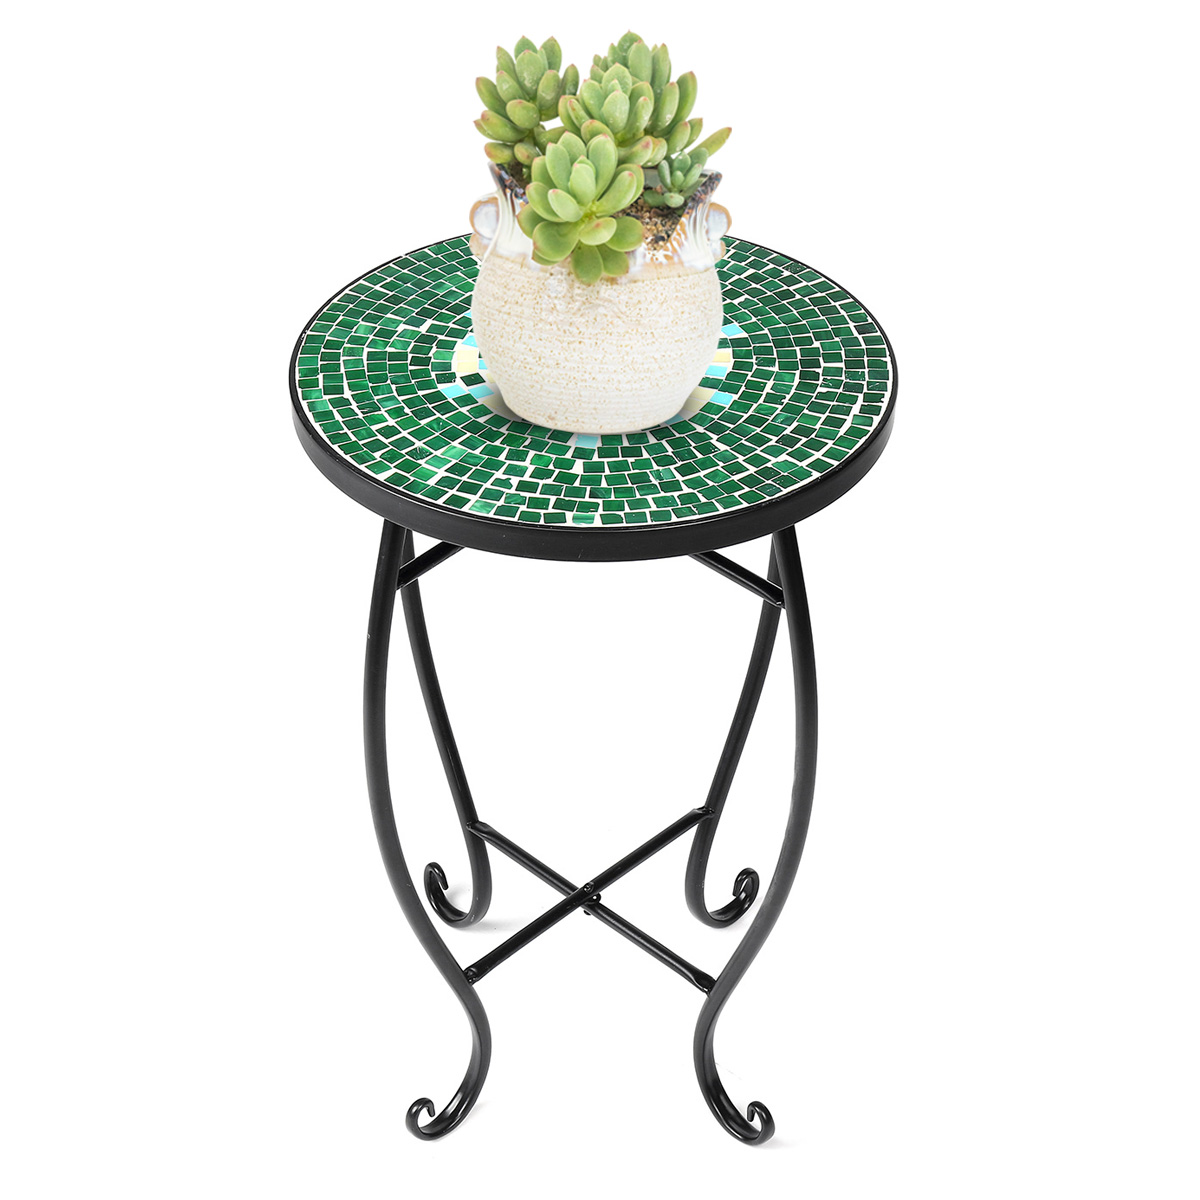 Accent Table Coffee Tables Decor Accent Side End Tables Plant Stand Chair for Bedroom, Living Room, Home Office and Patio - image 5 of 11